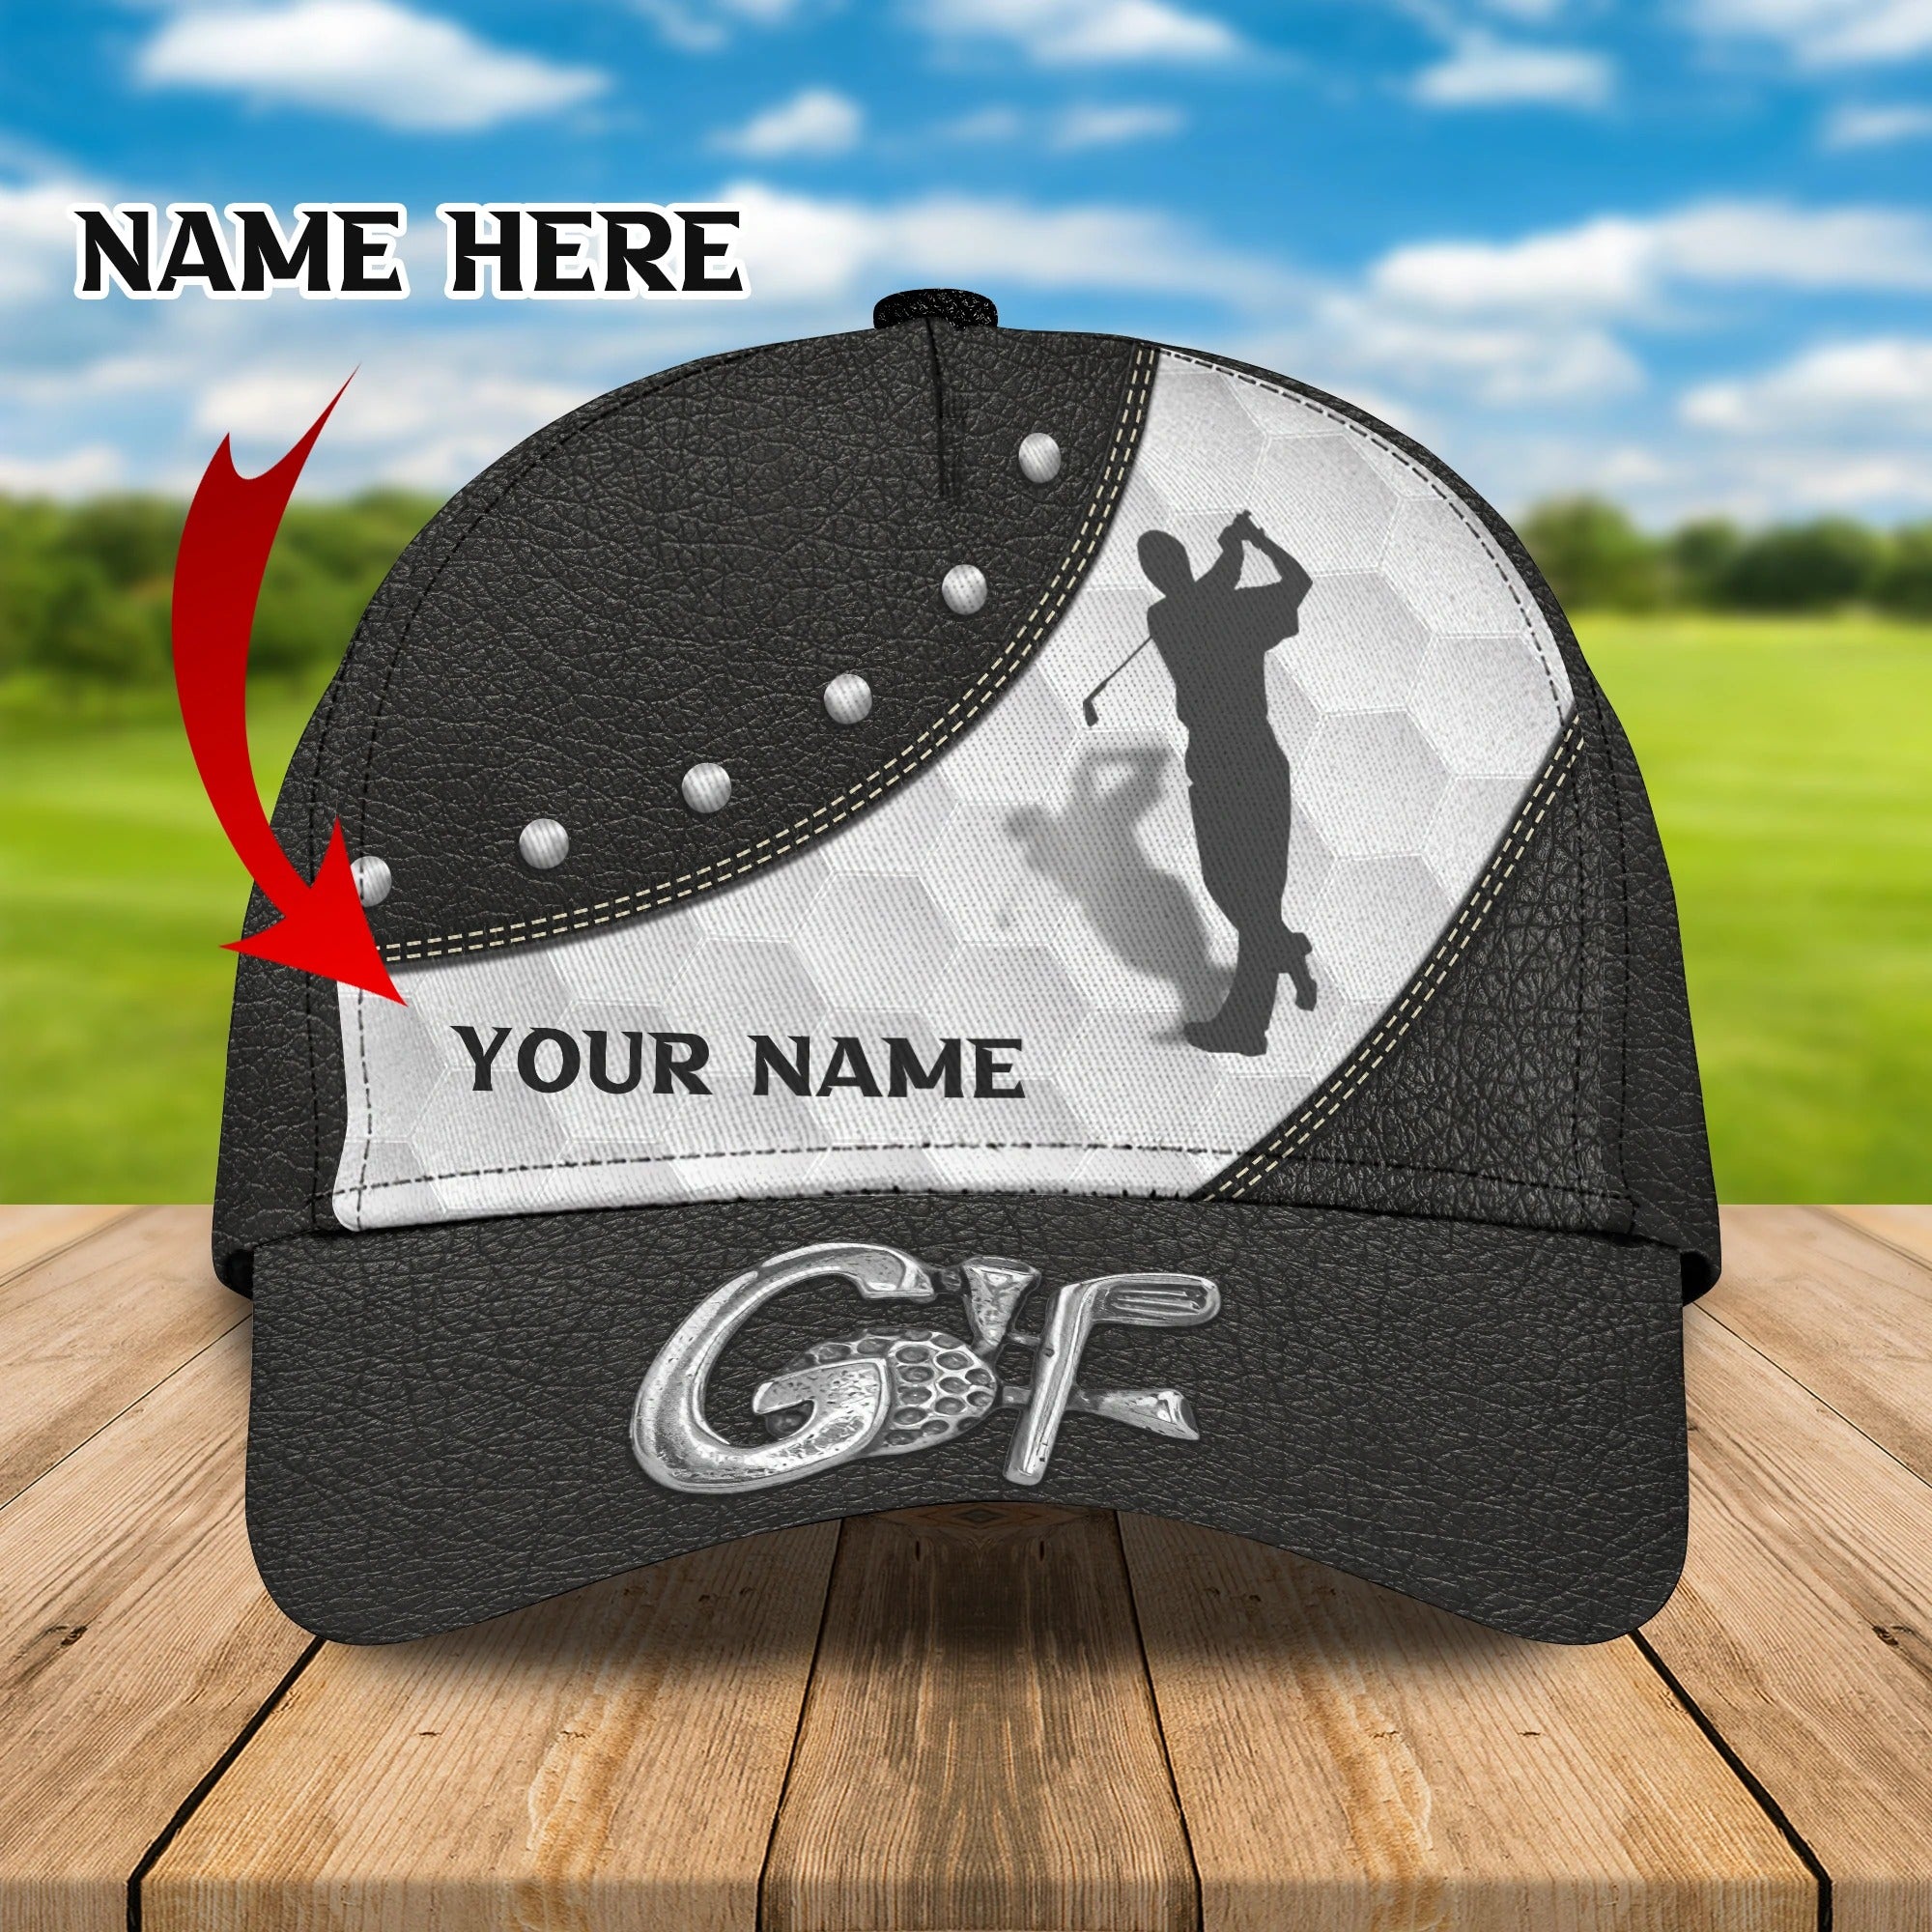 Customized Cap For Golfer/ Golf Womans Cap/ Classic Cap For Golf Lover/ Christmas Golfer Gifts